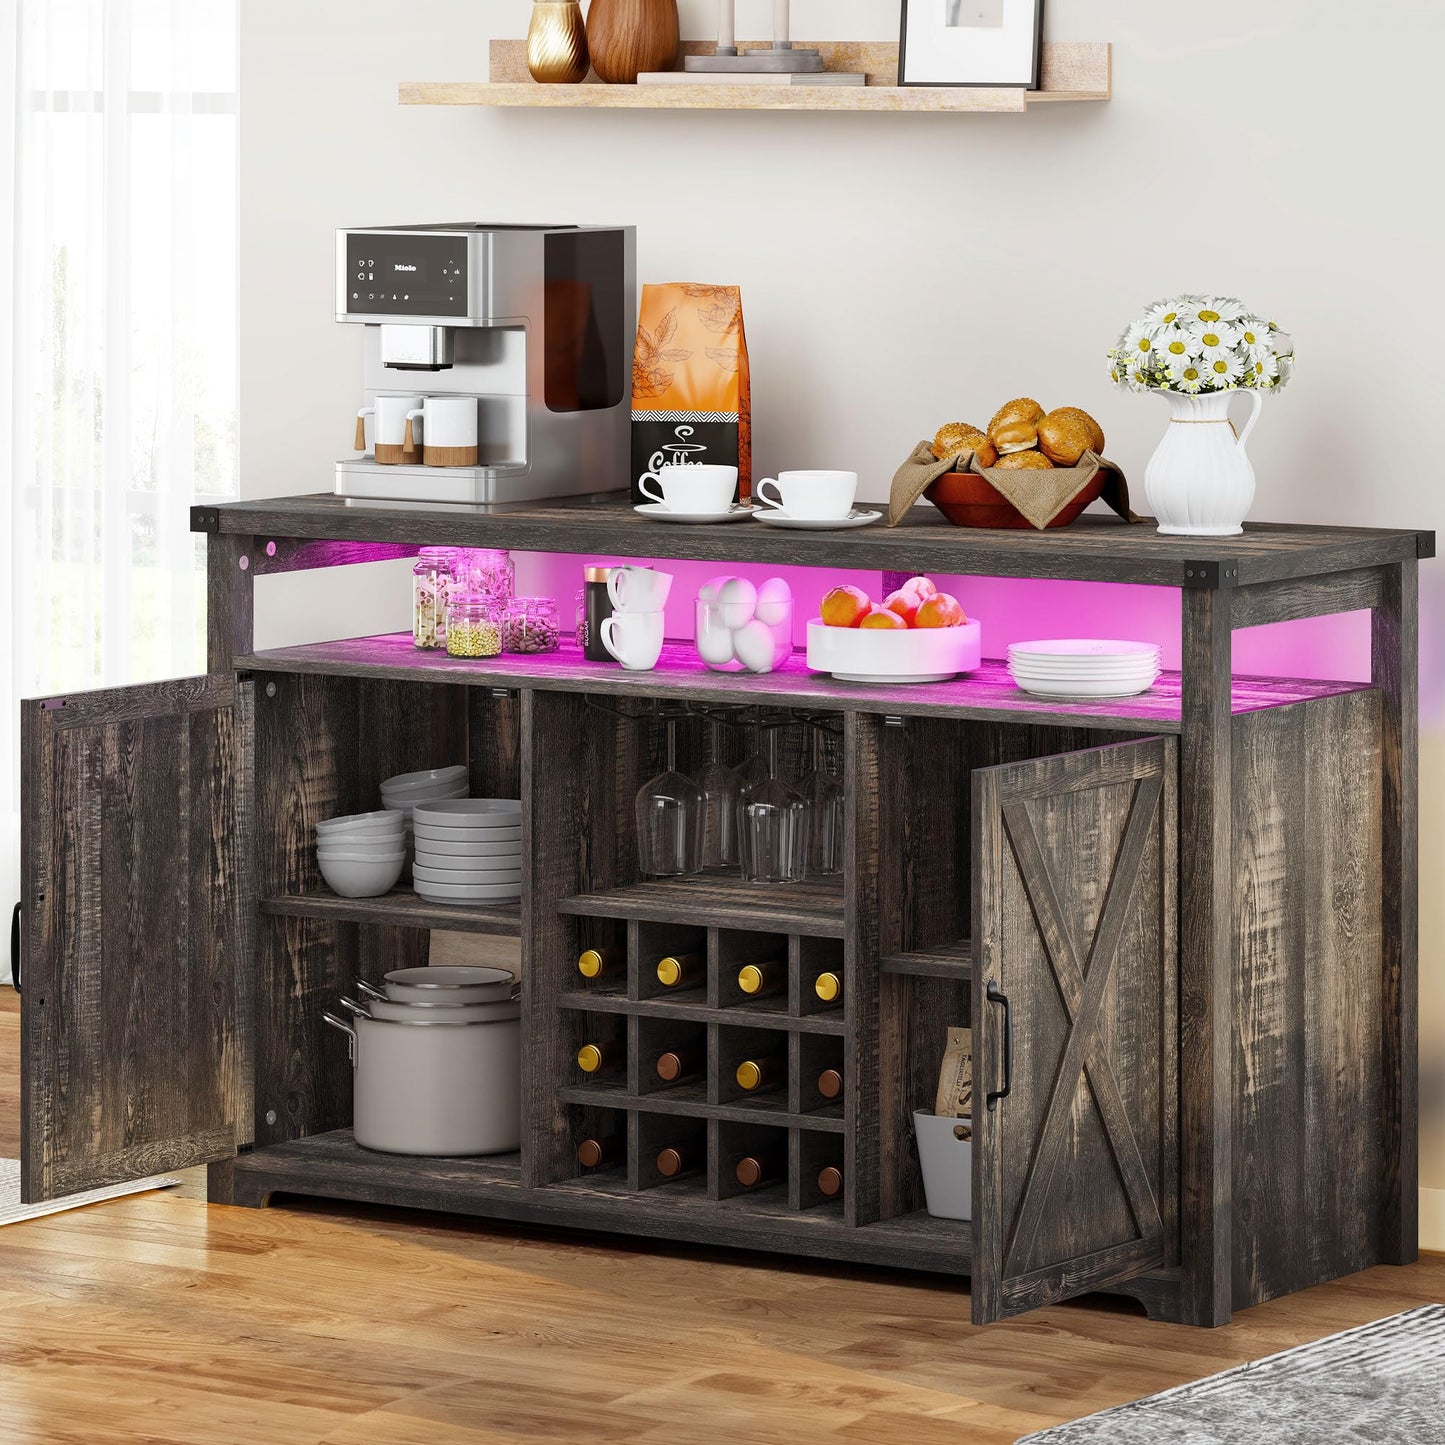 YITAHOME Farmhouse Coffee Bar Cabinet with LED Lights, 55" Sideboard Buffet Table w/Door & Wine and Glasses Rack, Home Liquor Bar w/Storage Shelves for Dining Room, Living Room, Dark Rustic Oak